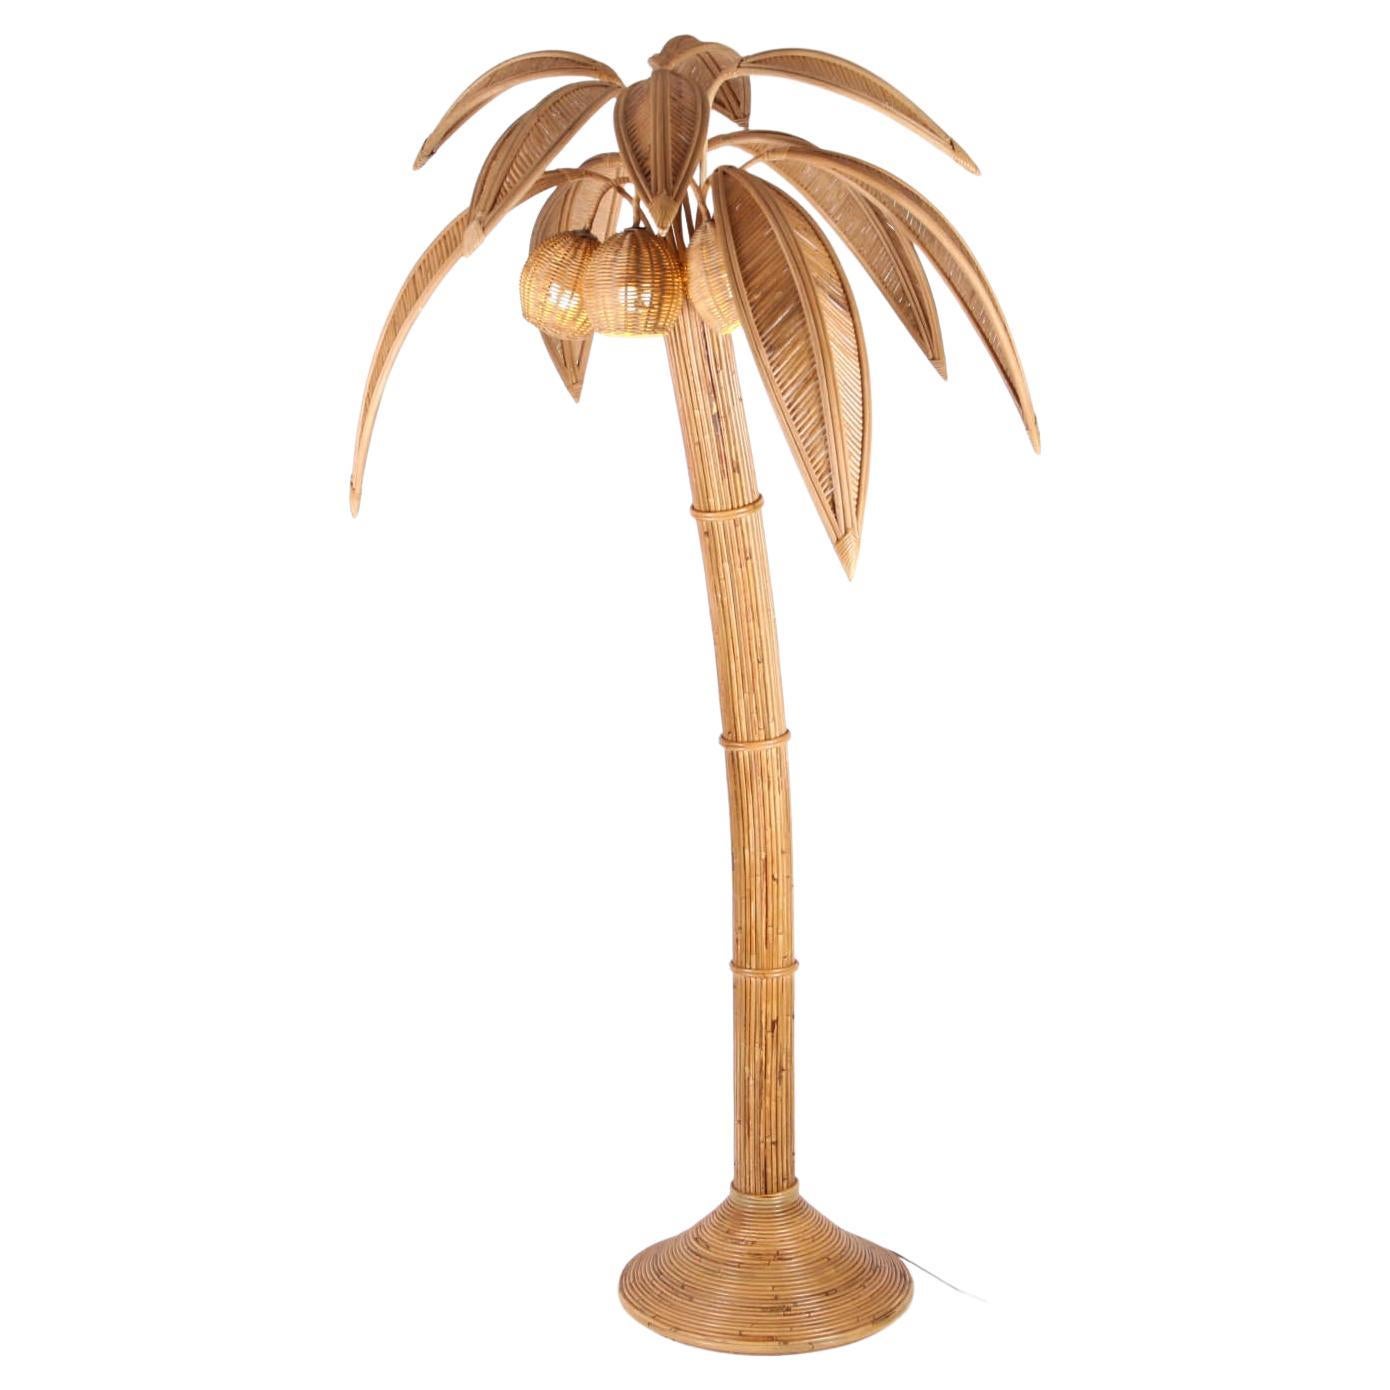 Rattan coconut tree/ palm tree floor lamp with 10 adjustable palms that come off for the shipping and 3 lights in the coconuts. Typical of the seventies, this is the absolute tropical decoration. High quality work entirely hand made. Excellent